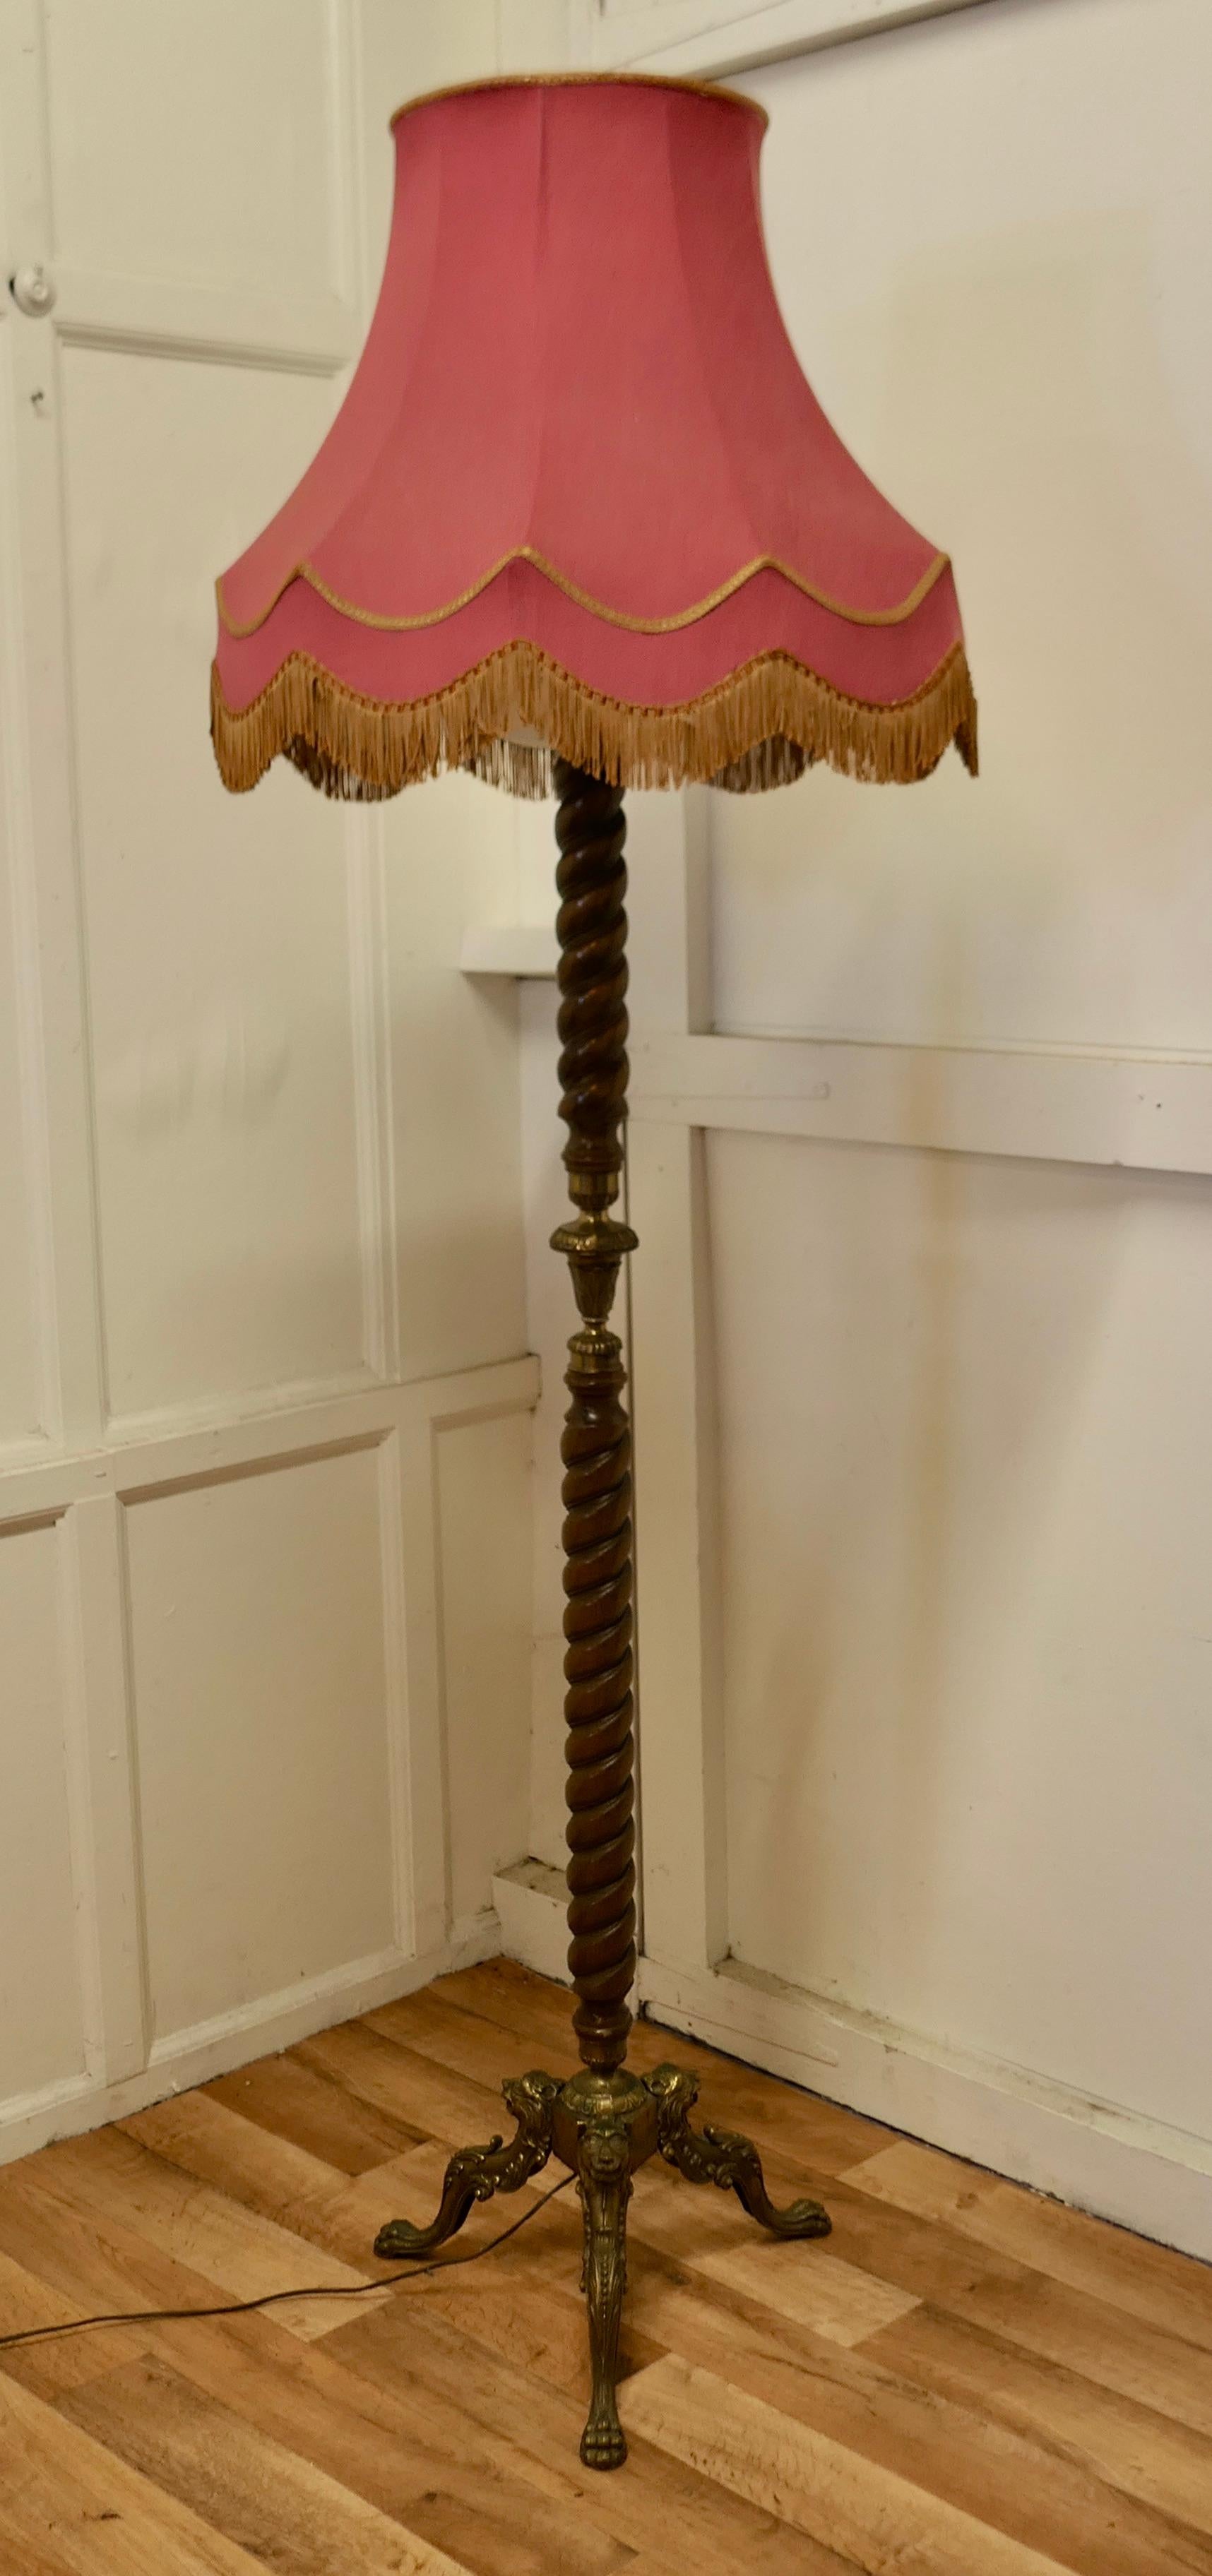 Arts and Crafts Walnut Barley Twist and brass floor standing lamp

A skilfully turned and very attractive piece of walnut forms the upright of the lamp, it is set on a 3 footed base in the form of 3 lions
The lamp is in good condition, the shade